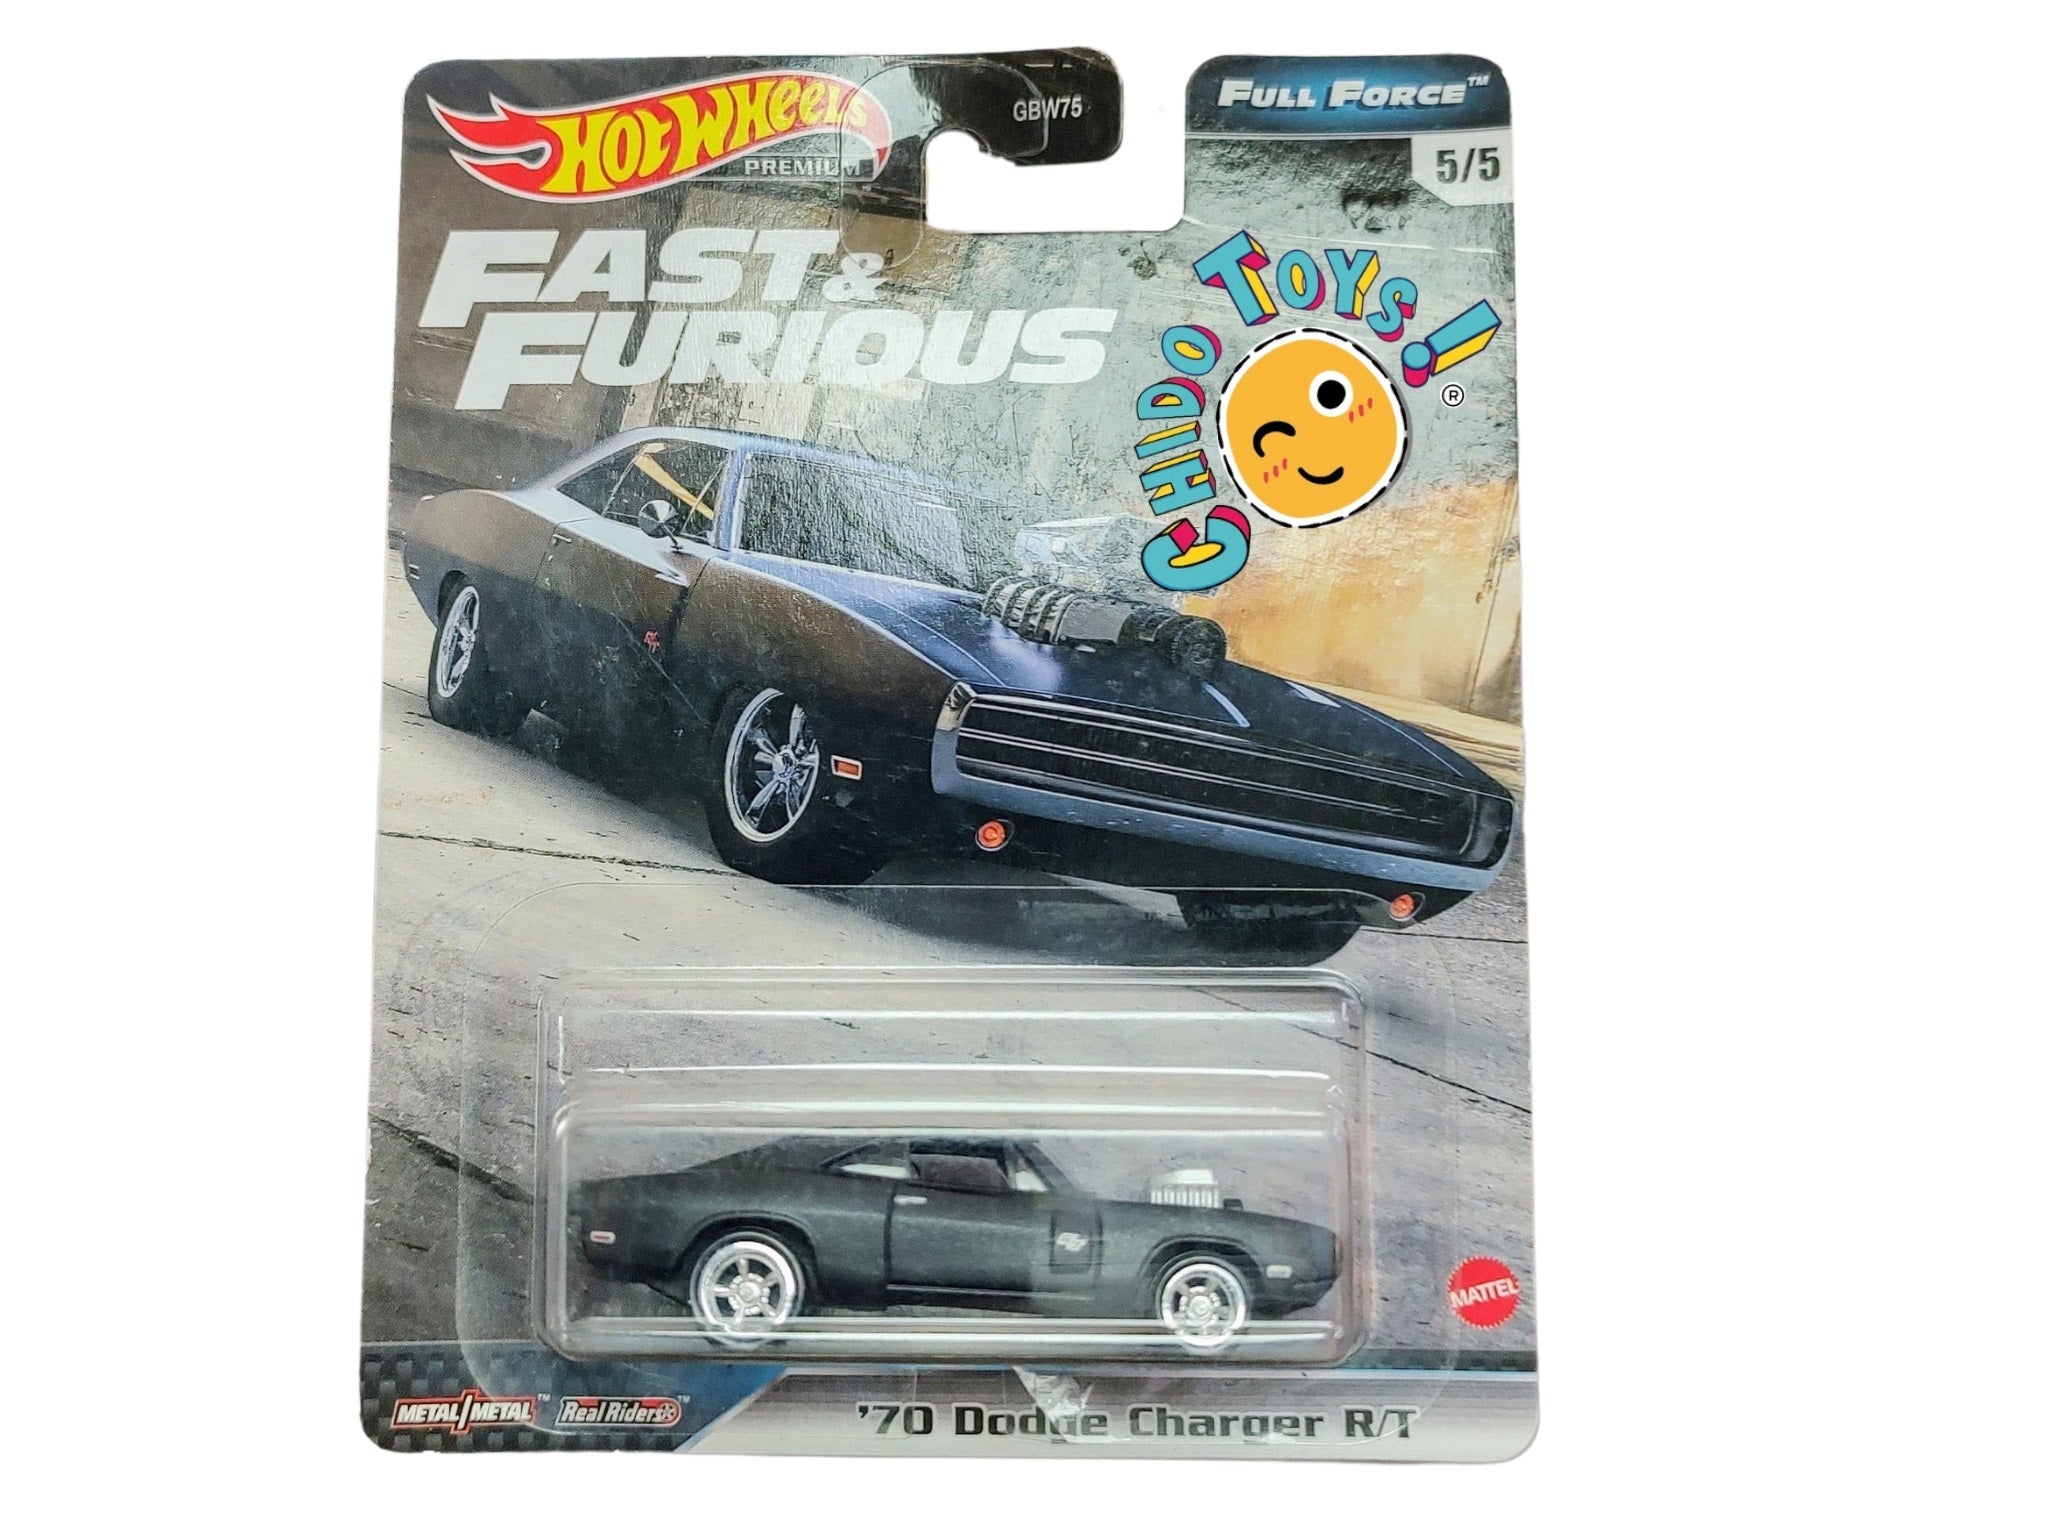 Hot Wheels Premium Dodge Charger 70' - Chido Toys